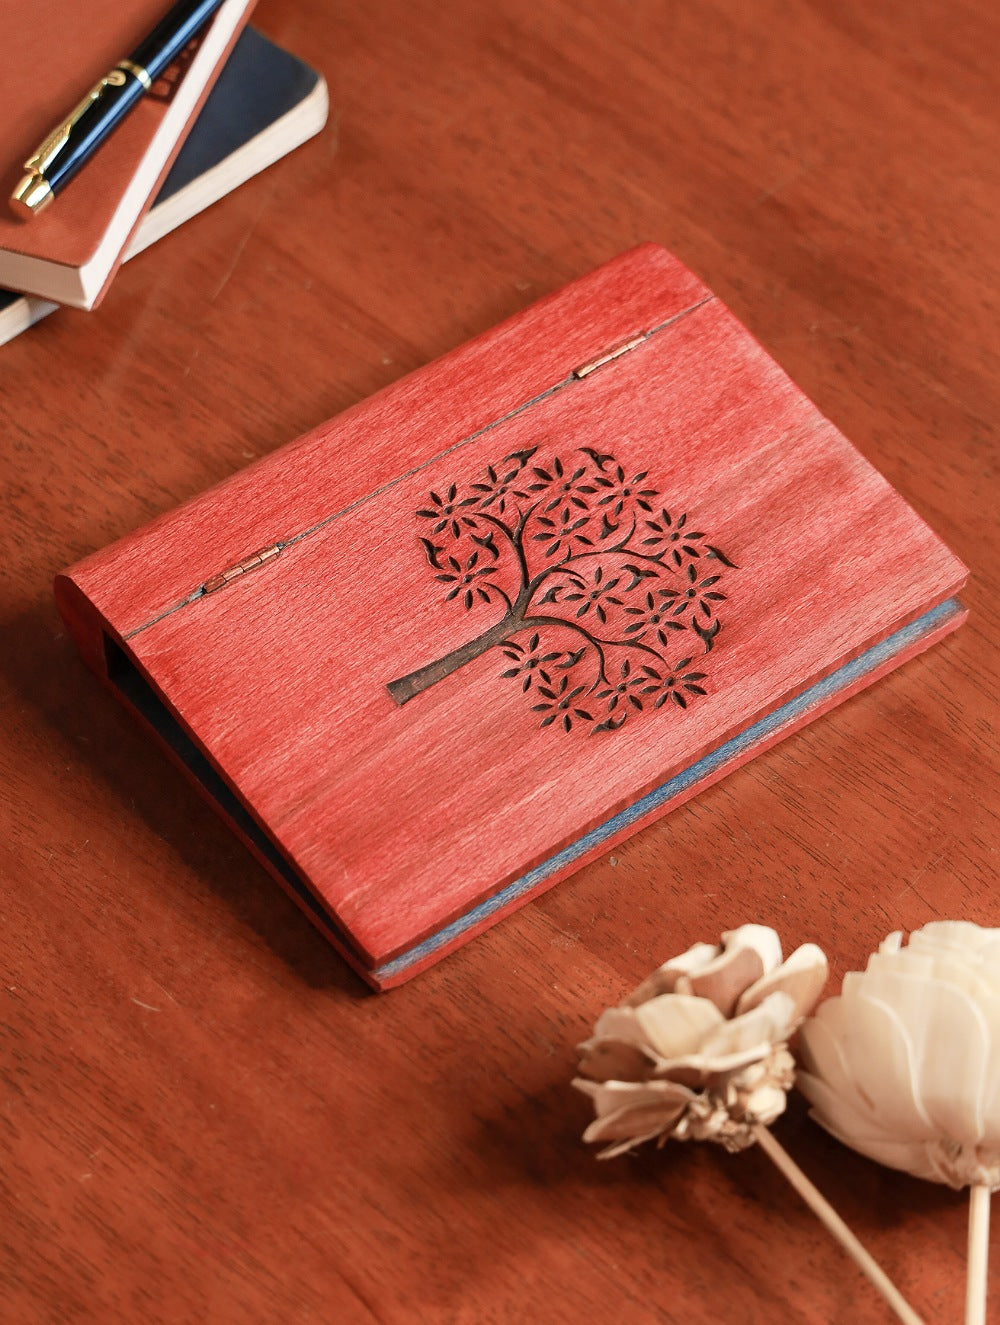 Load image into Gallery viewer, Handcrafted Wooden Engraved Paper Holder - Red